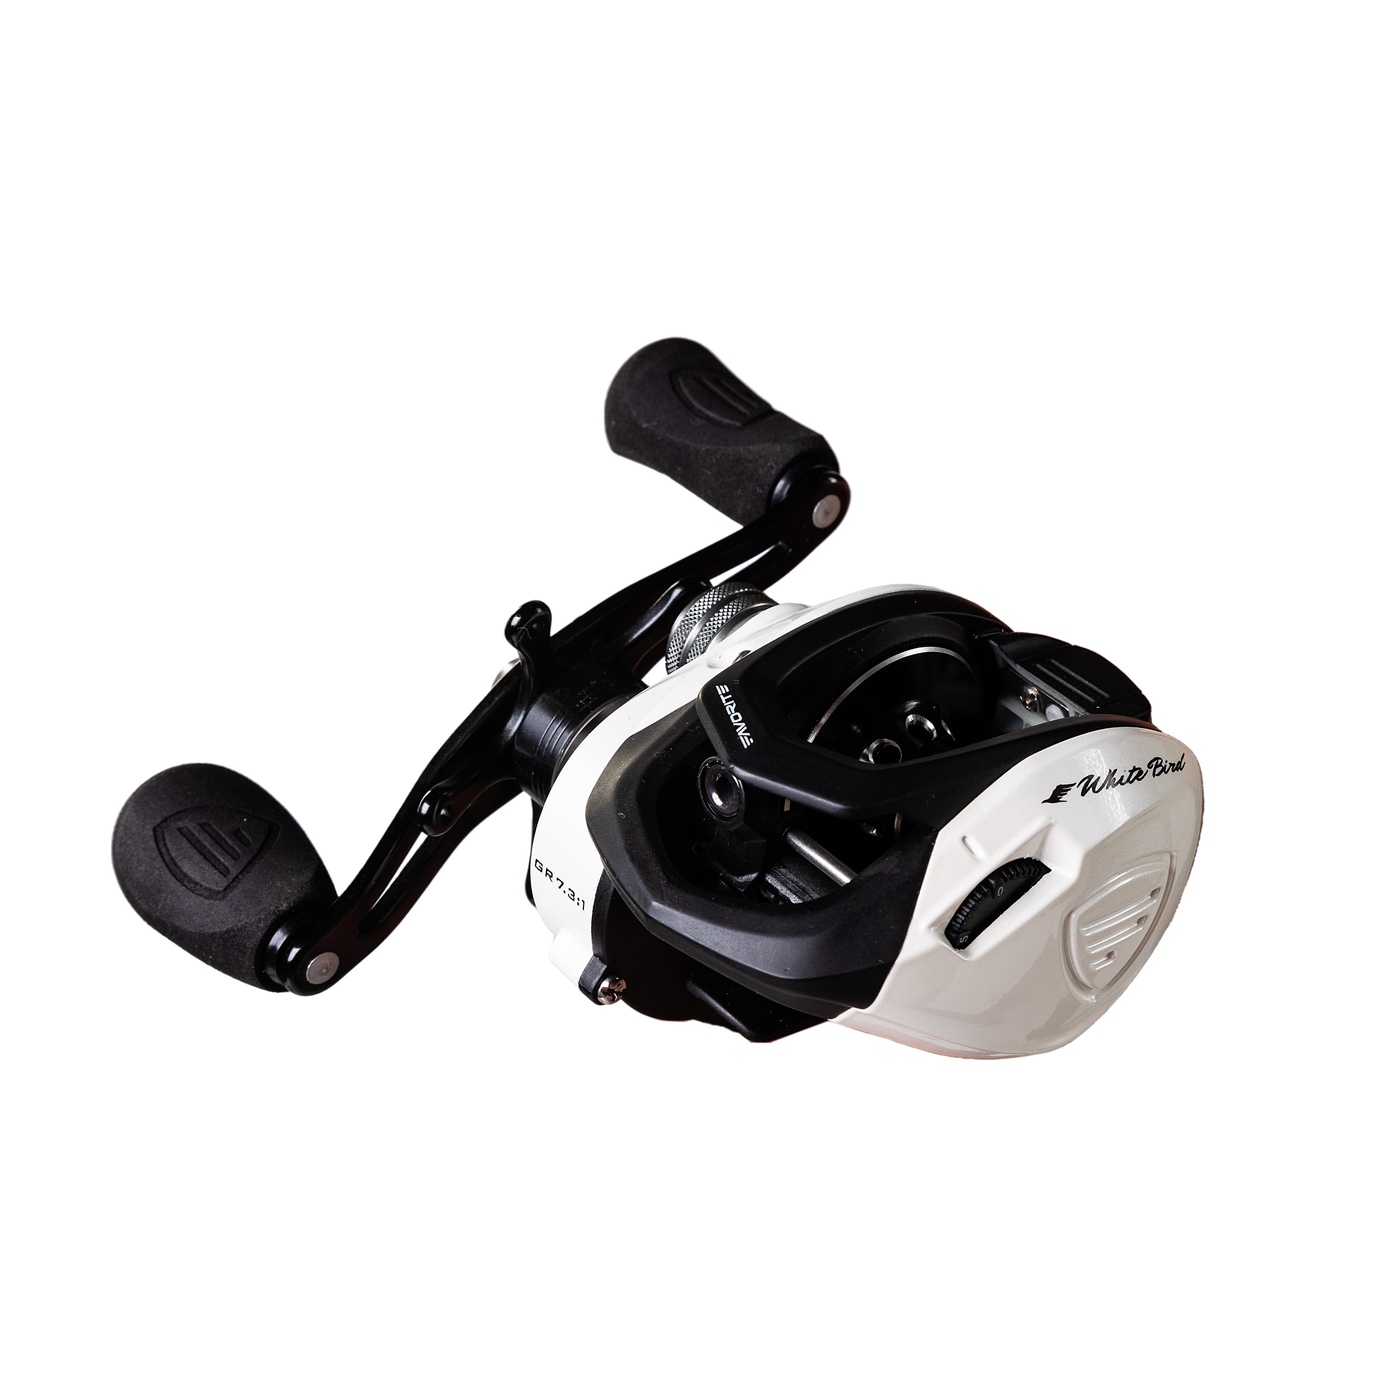 Favorite Fishing White Bird Casting Reel Giveaway Winners - Wired2Fish